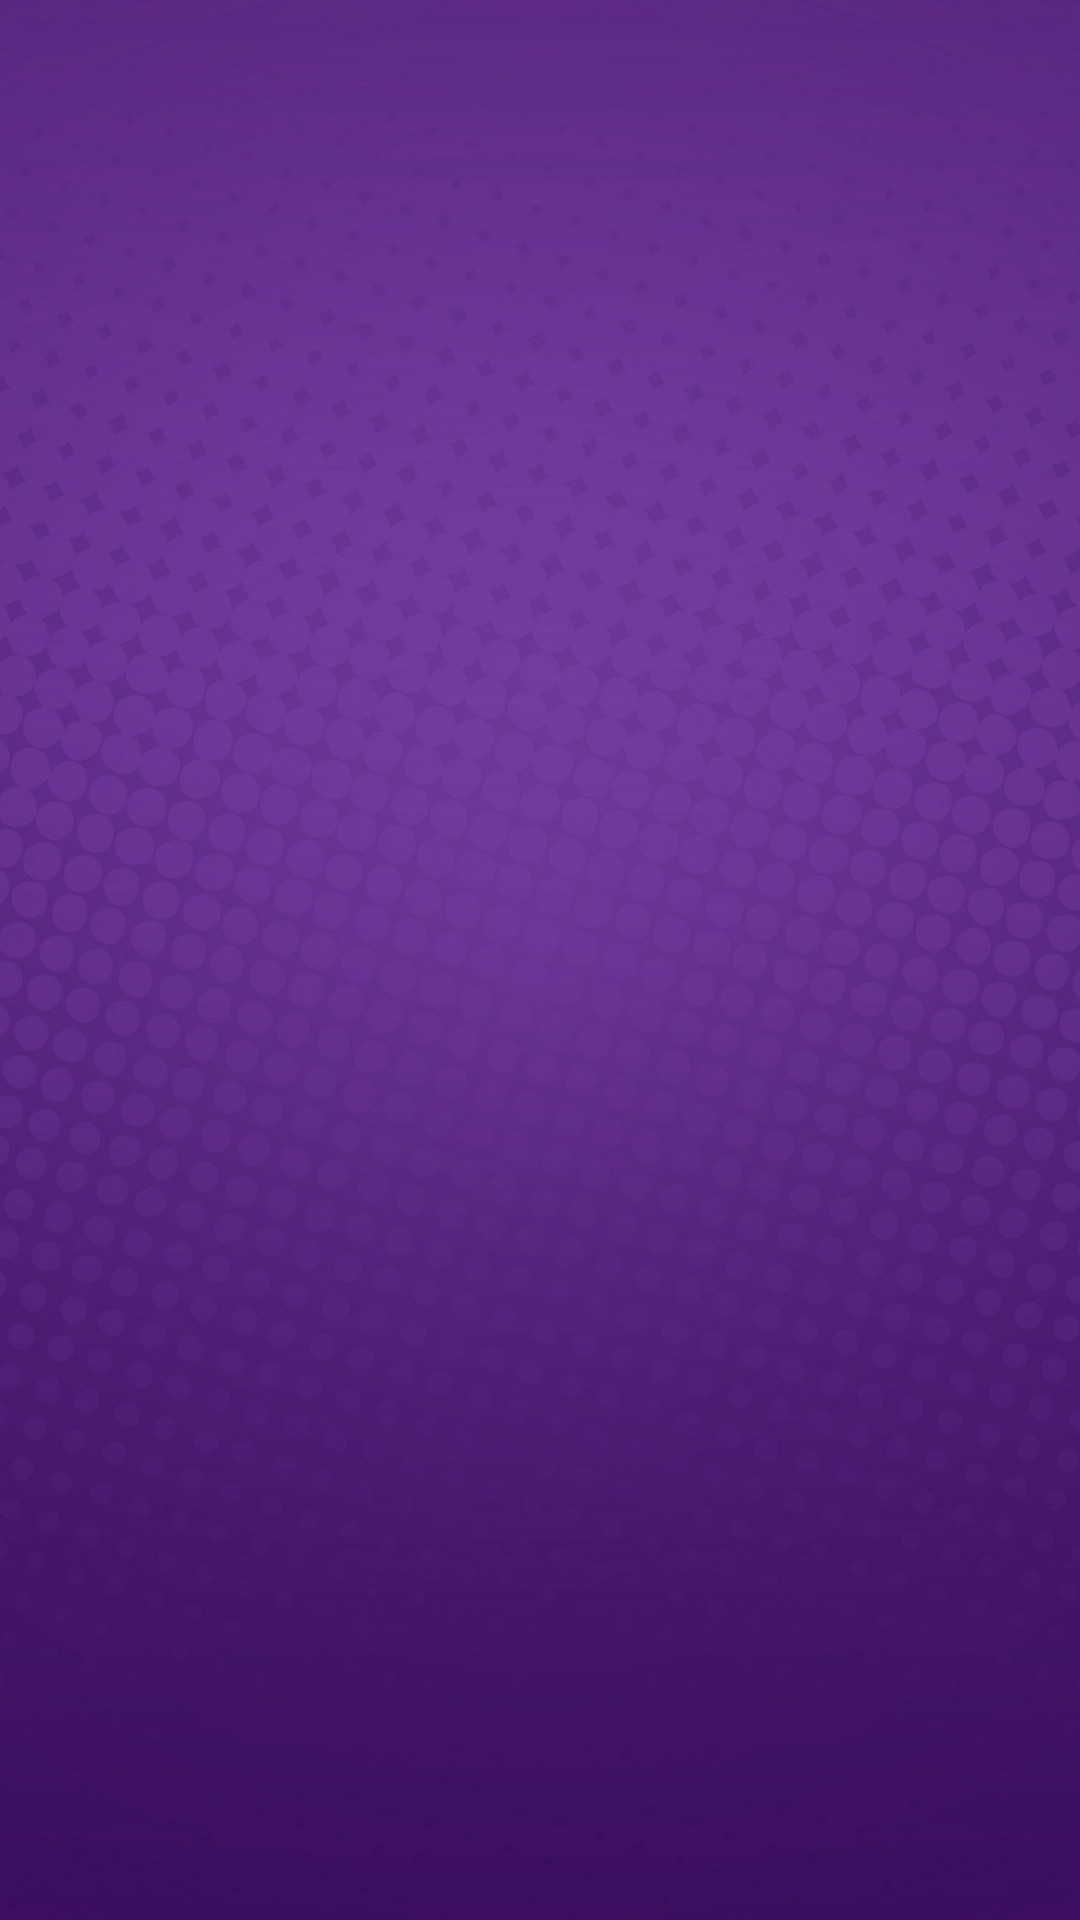 Cool Purple iPhone Wallpaper in HD With high-resolution 1080X1920 pixel. You can set as wallpaper for Apple iPhone X, XS Max, XR, 8, 7, 6, SE, iPad. Enjoy and share your favorite HD wallpapers and background images